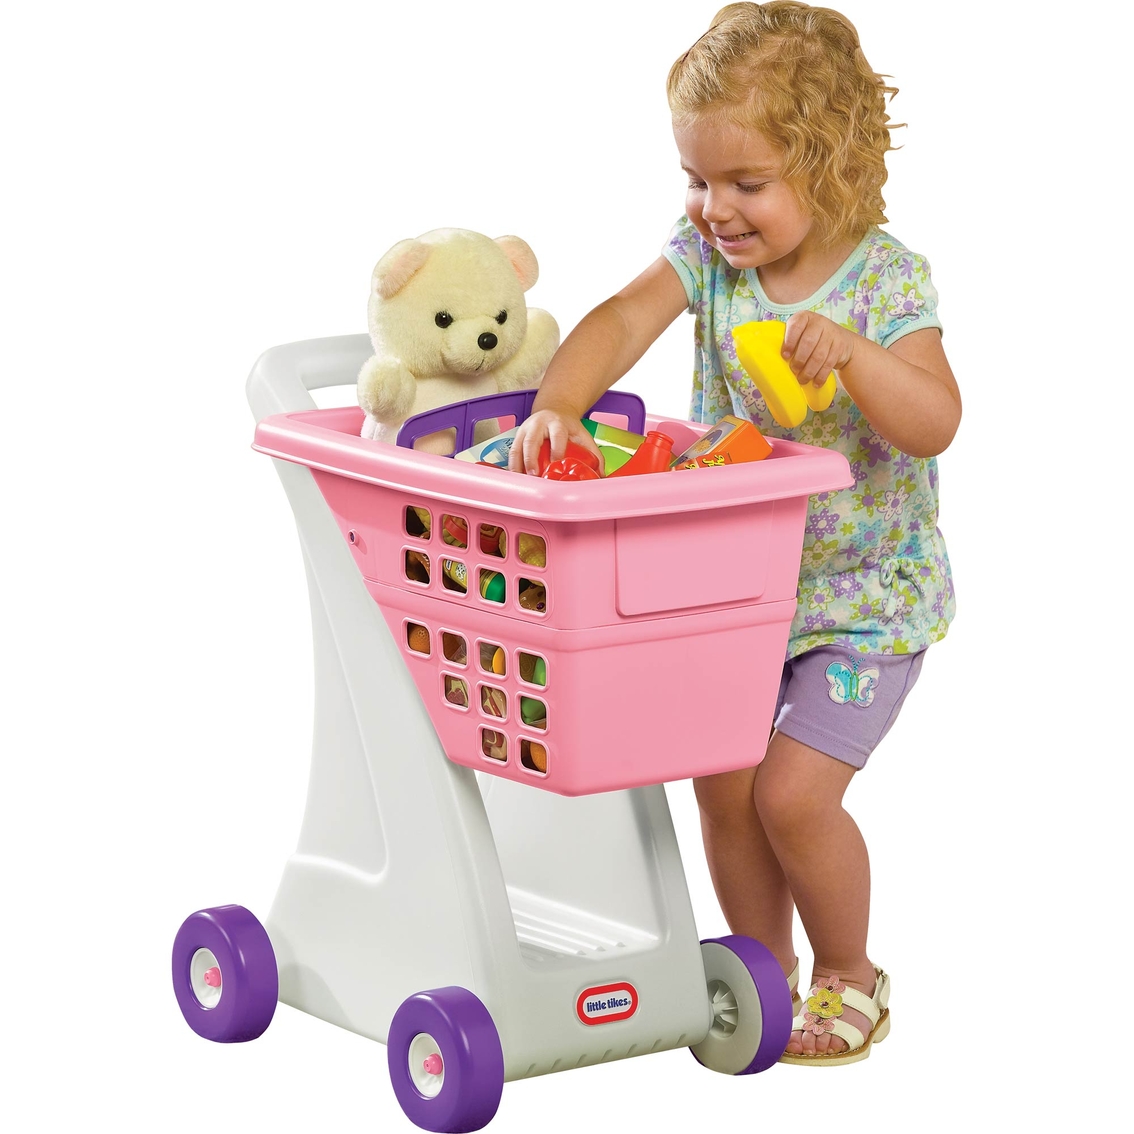 Little Tikes Shopping Cart - Image 3 of 3